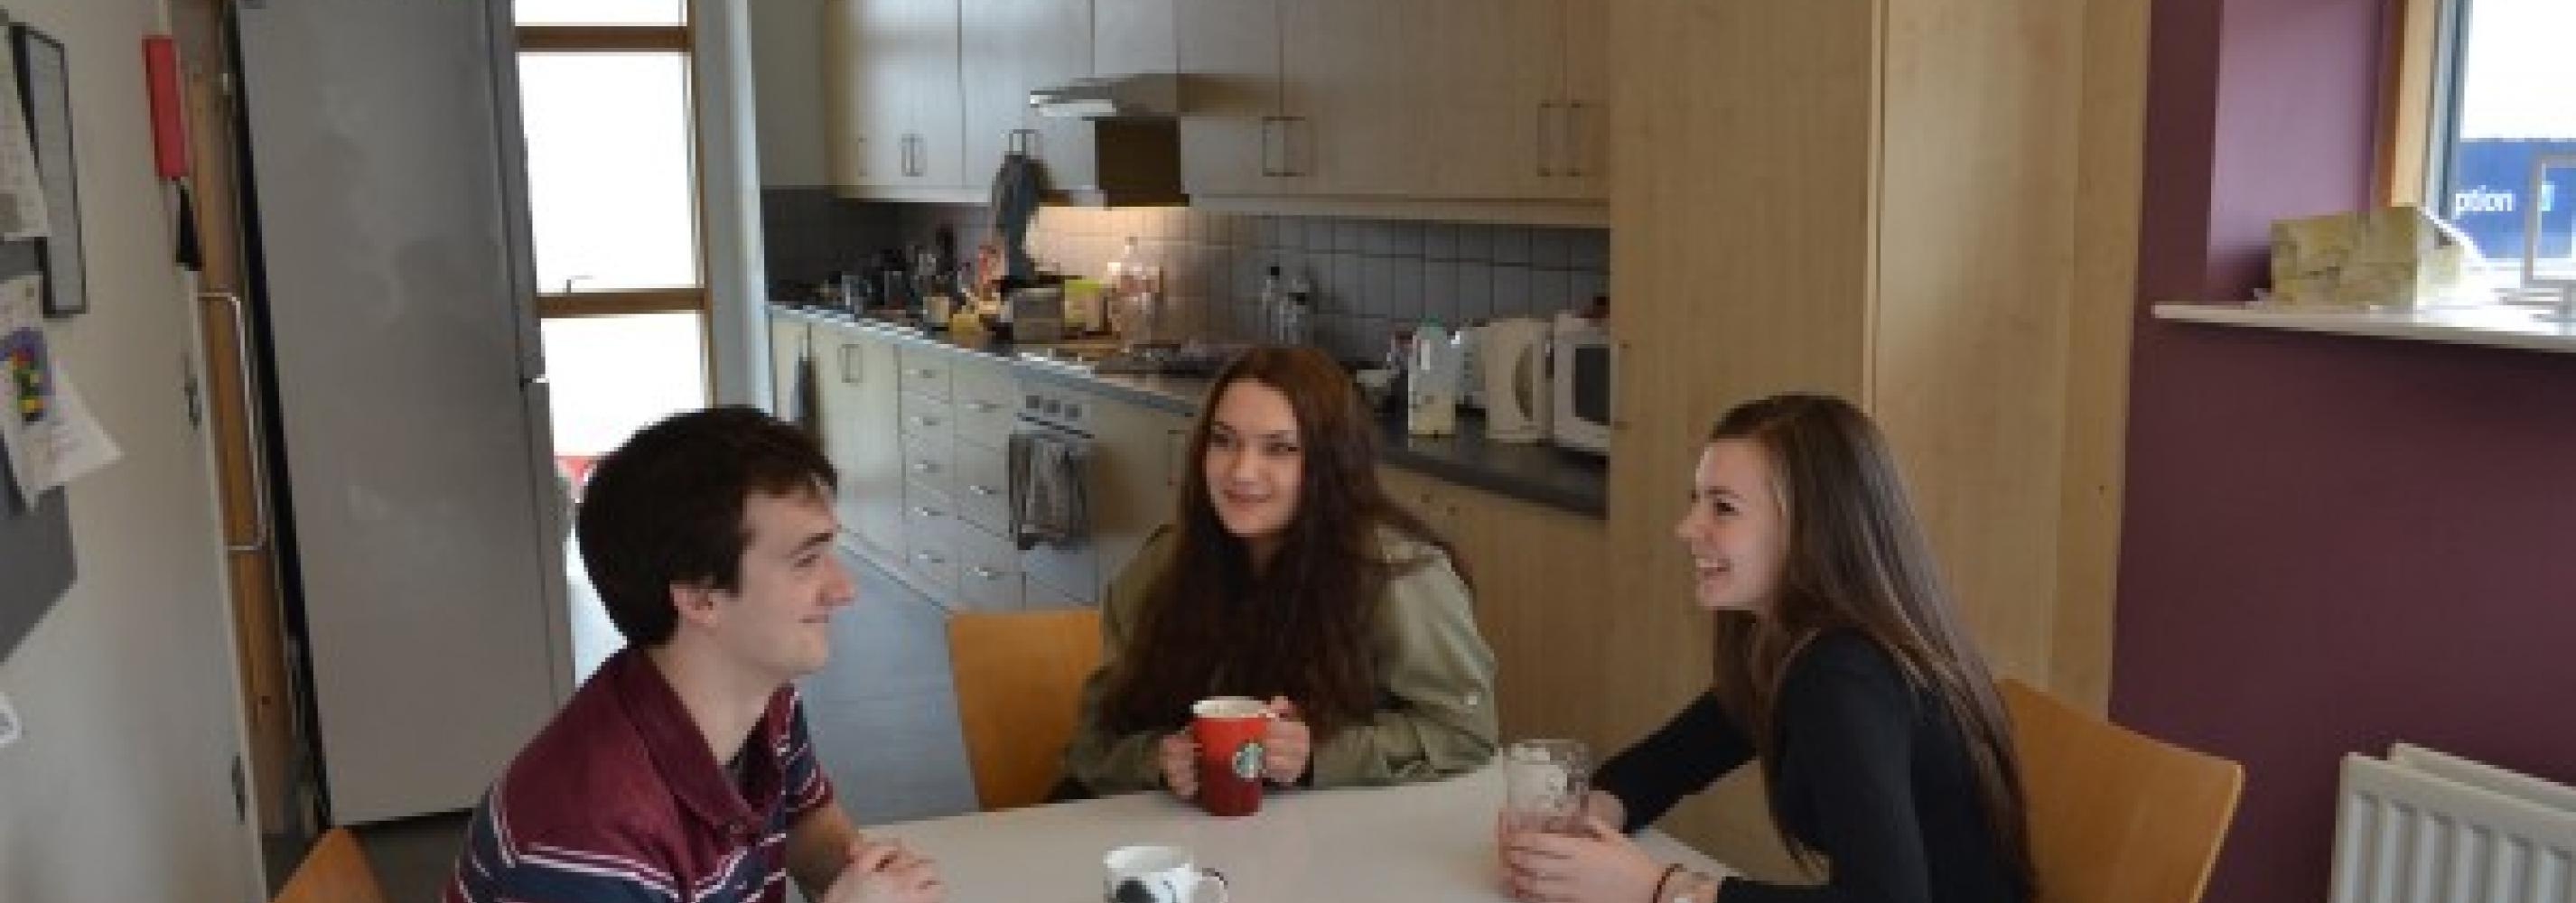 Students sat at dining table in a kitchen area with fridge freezer, oven, sink, kettle, toaster and microwave